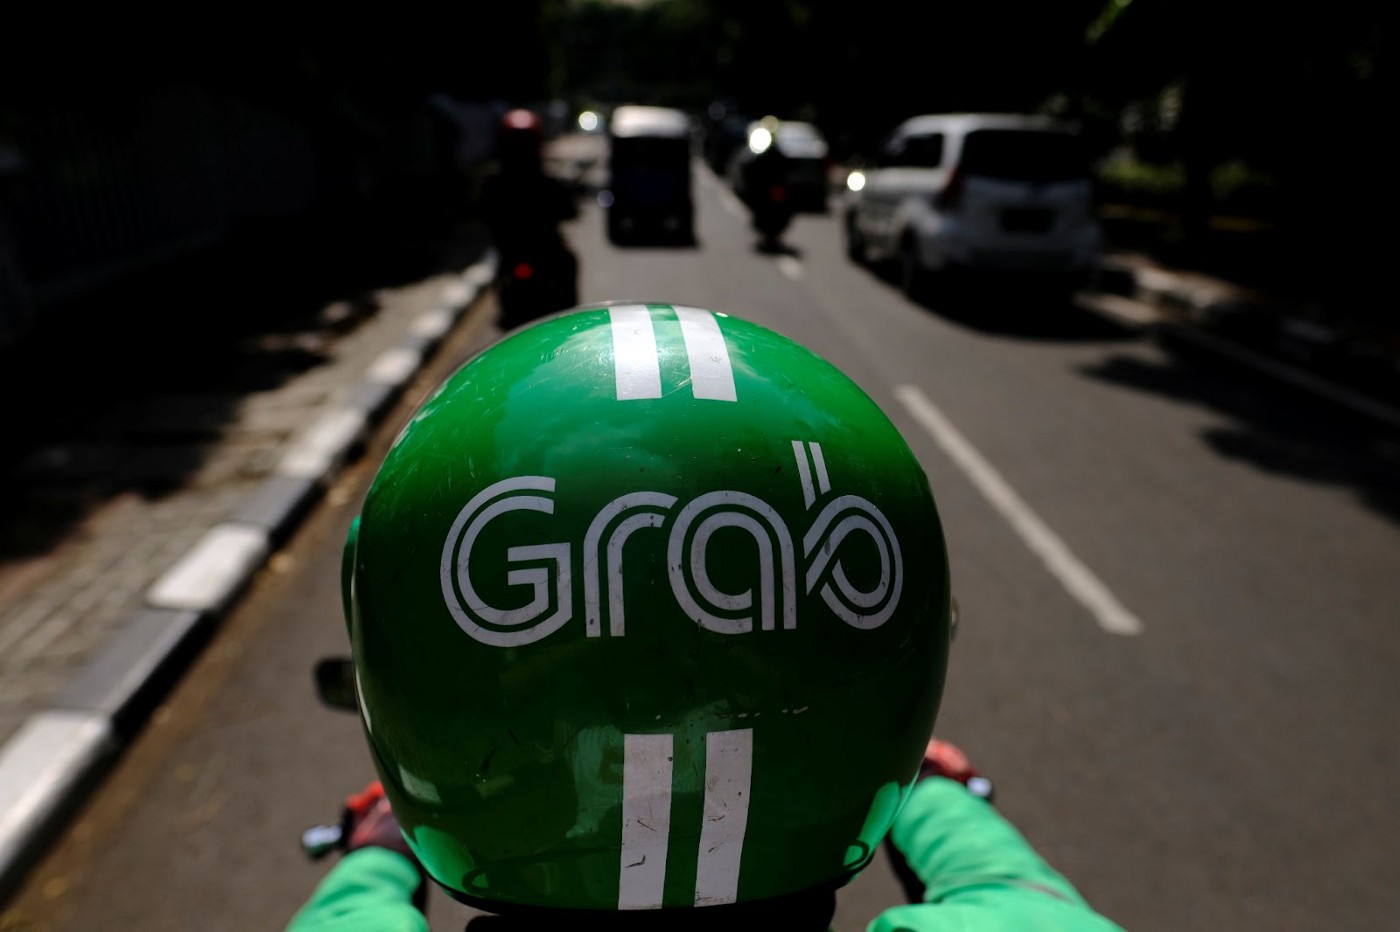 Daily Markup #303: Emtek invests US$375M in Grab Indonesia’s technology unit to boost MSME inclusion; HappyFresh bags US$65M in funding to improve user experience; Arcstone on building talent for digital manufacturing